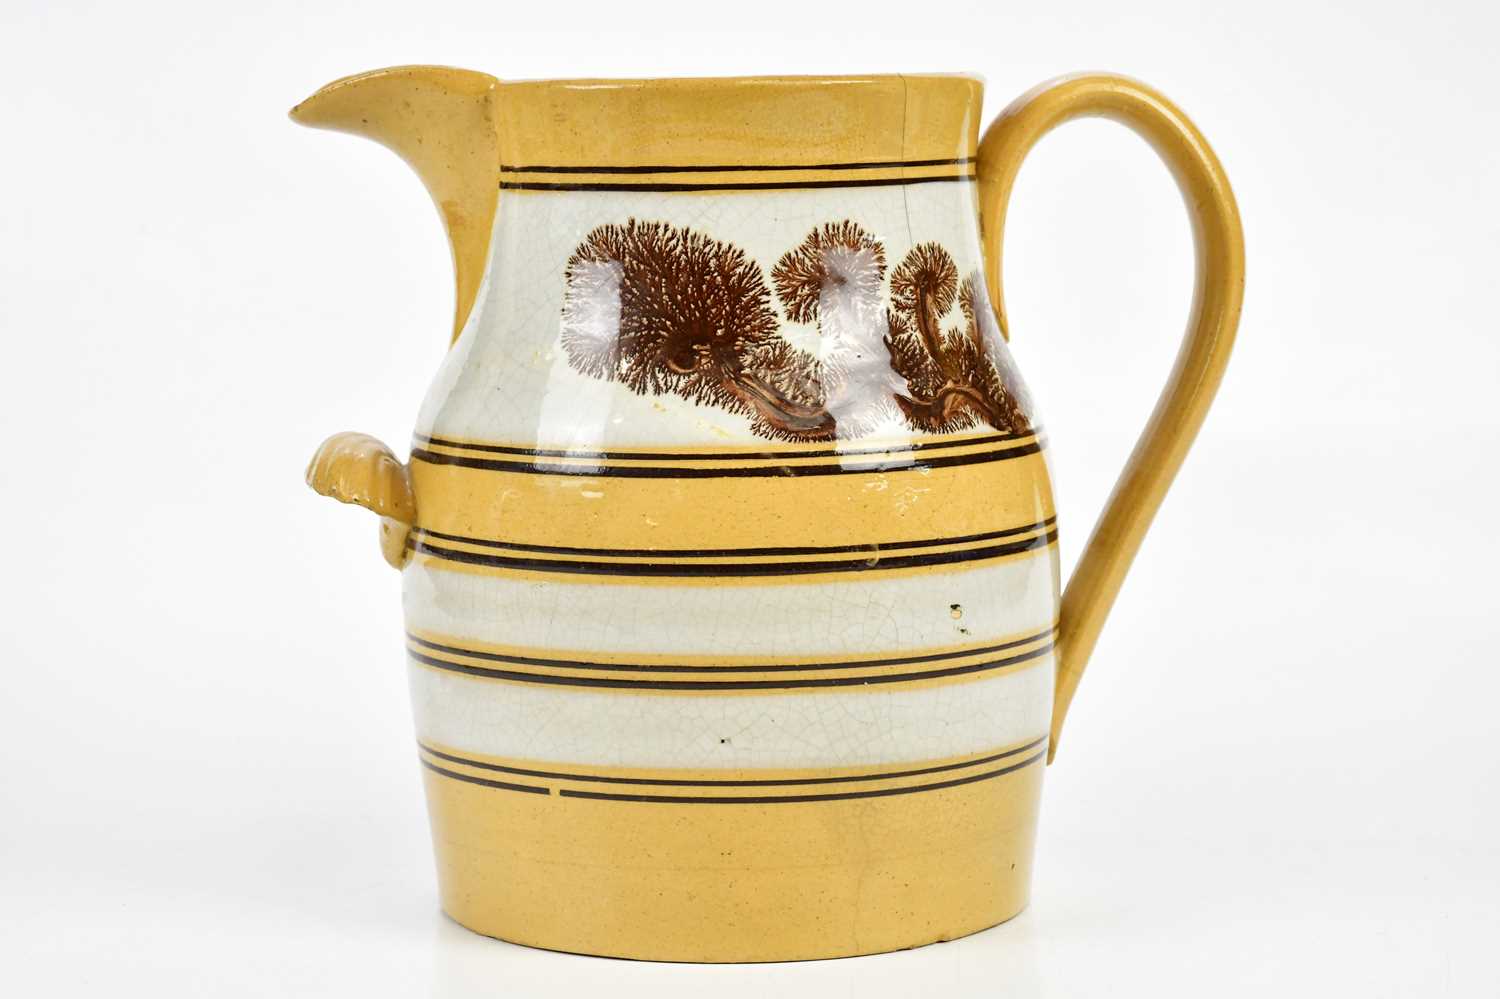 A 19th century Mocha ware jug, decorated with a pale yellow glaze, height 30cm. Condition Report: